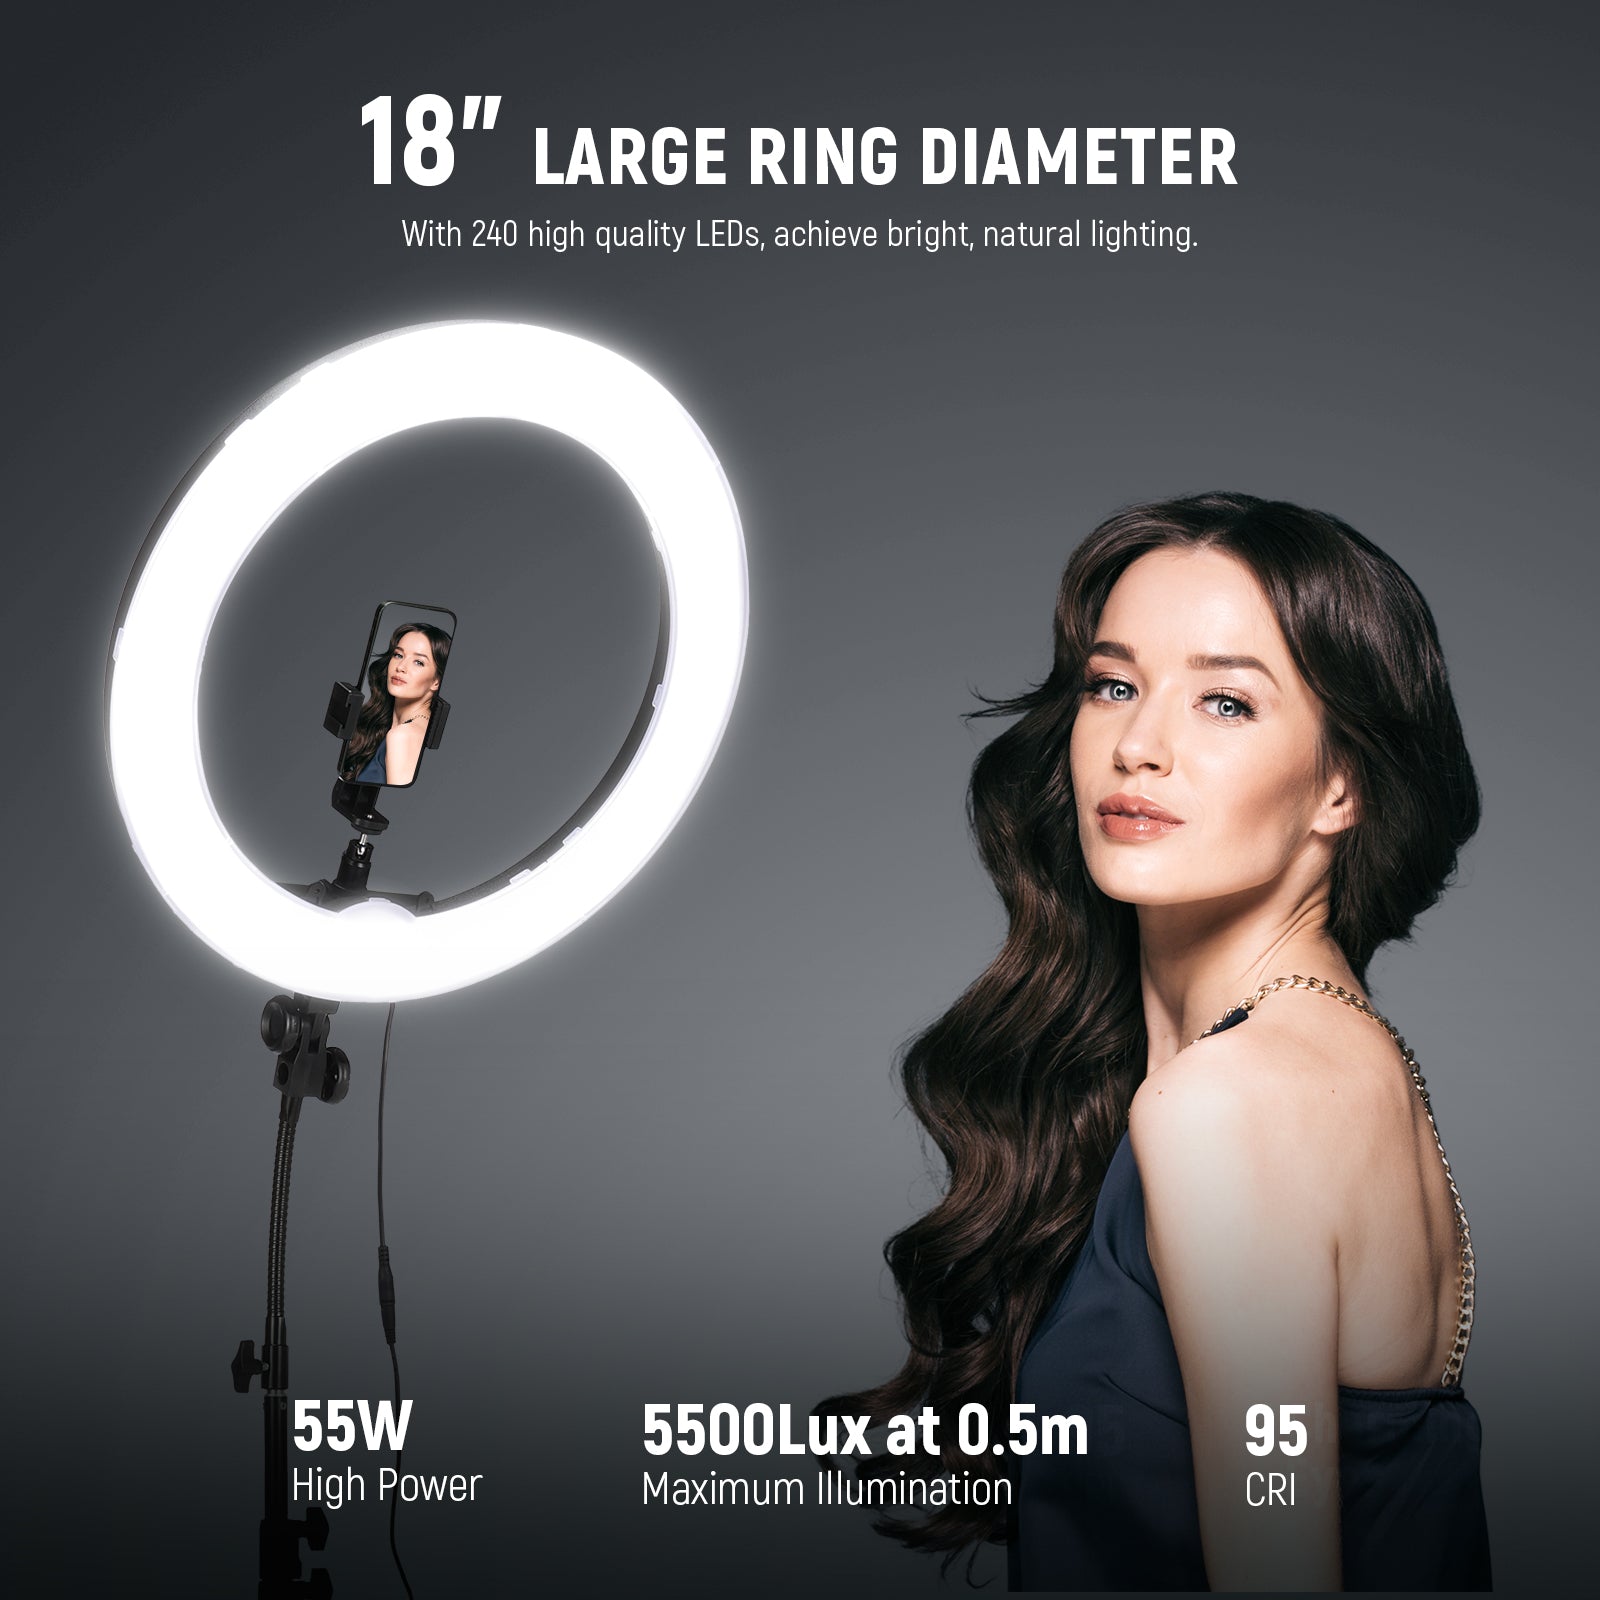 NEEWER RL-18 LED Ring Lights 18 Dimmable Light with Stand - NEEWER